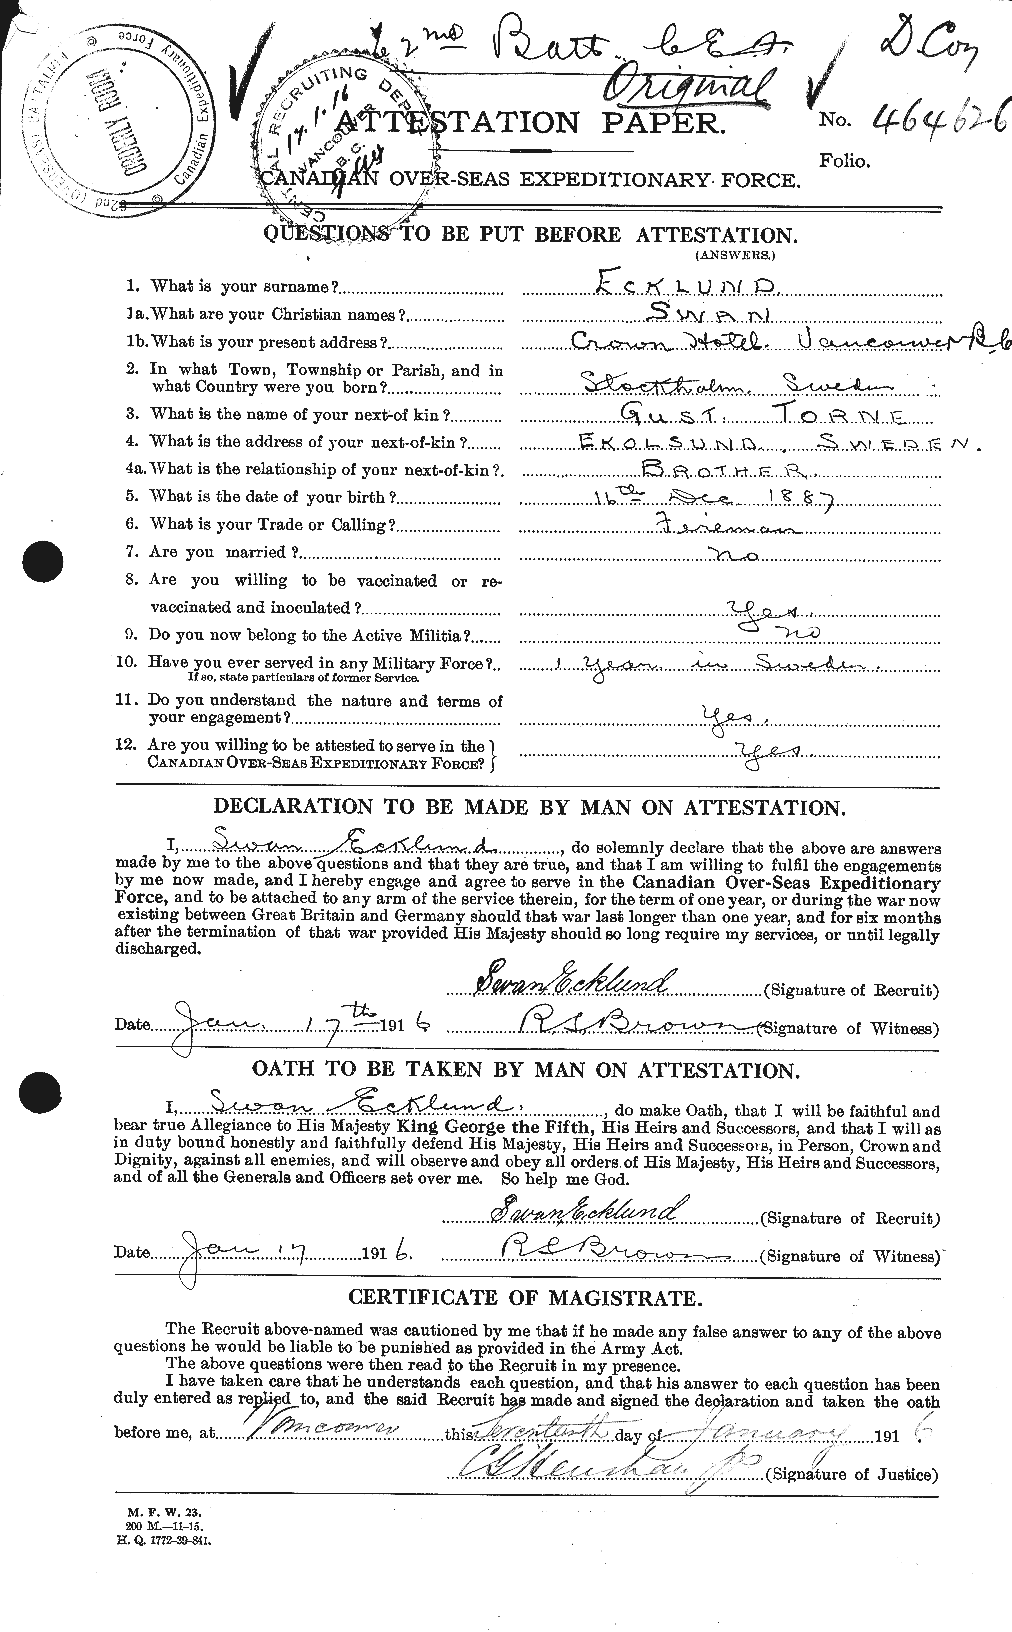 Personnel Records of the First World War - CEF 310483a